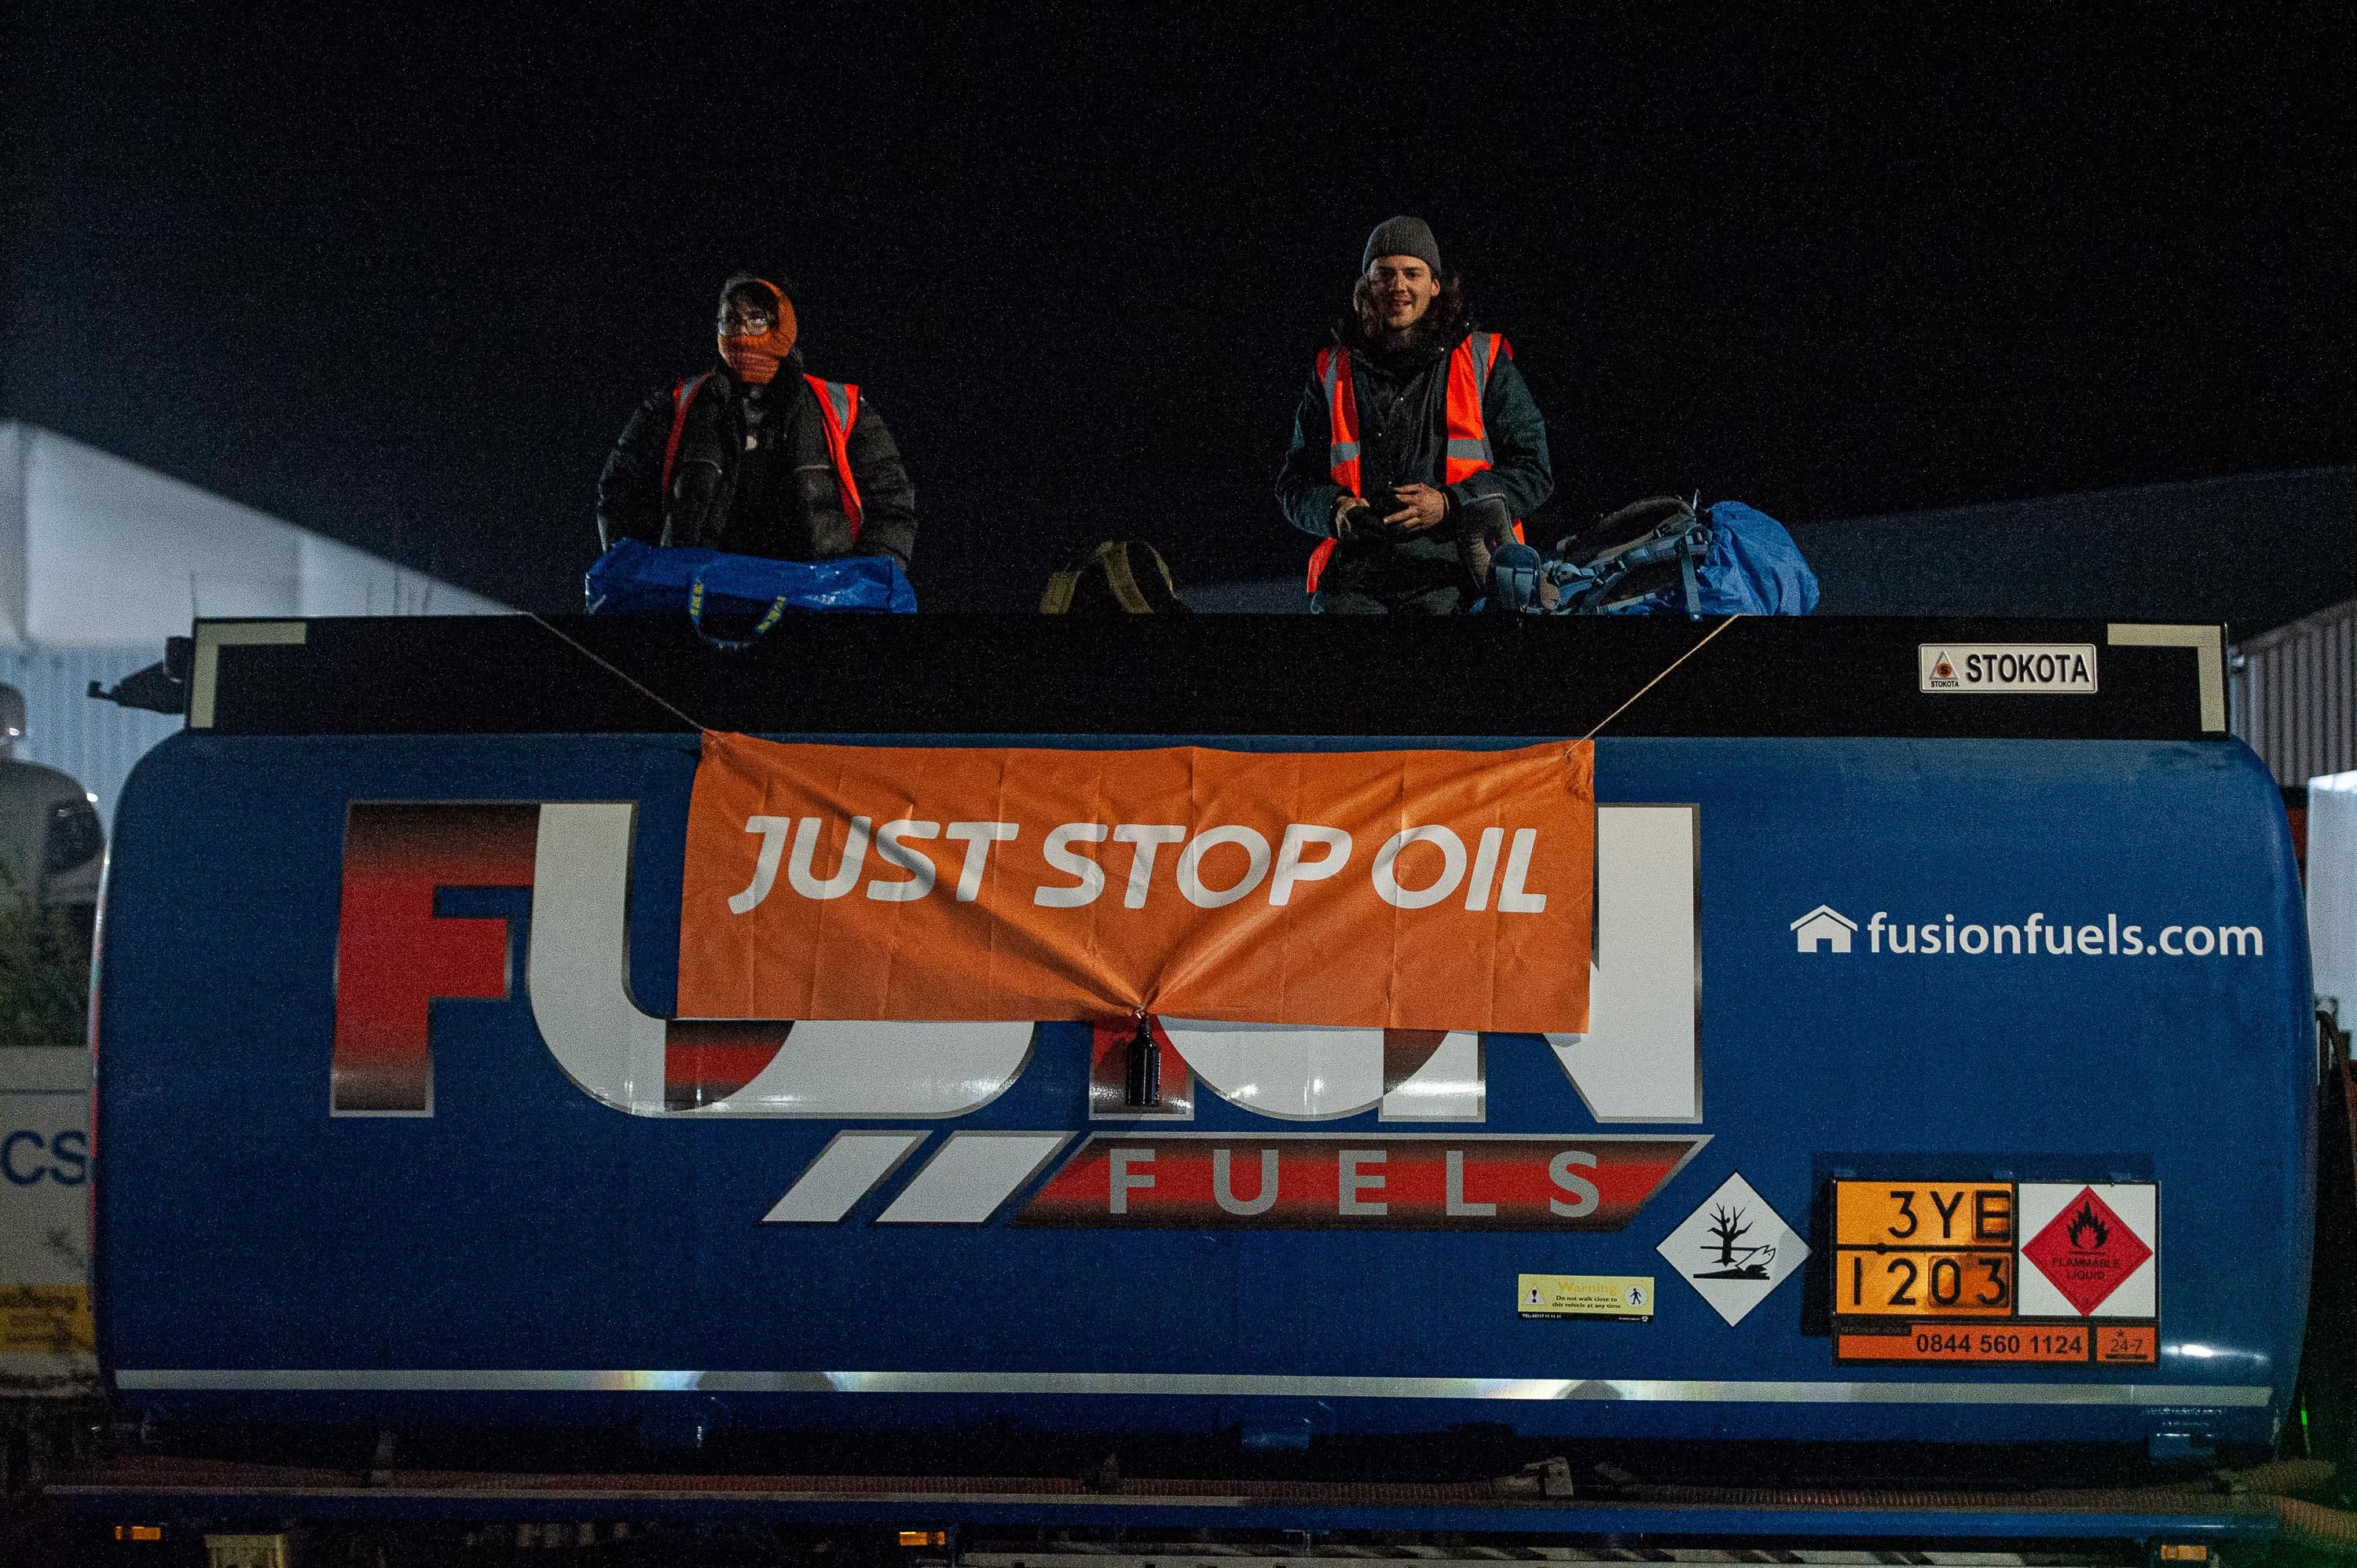 Activists from the 'Just Stop Oil' coalition shut down a terminal by boarding fuel transport vehicles on April 1, 2022 in Grays, England.